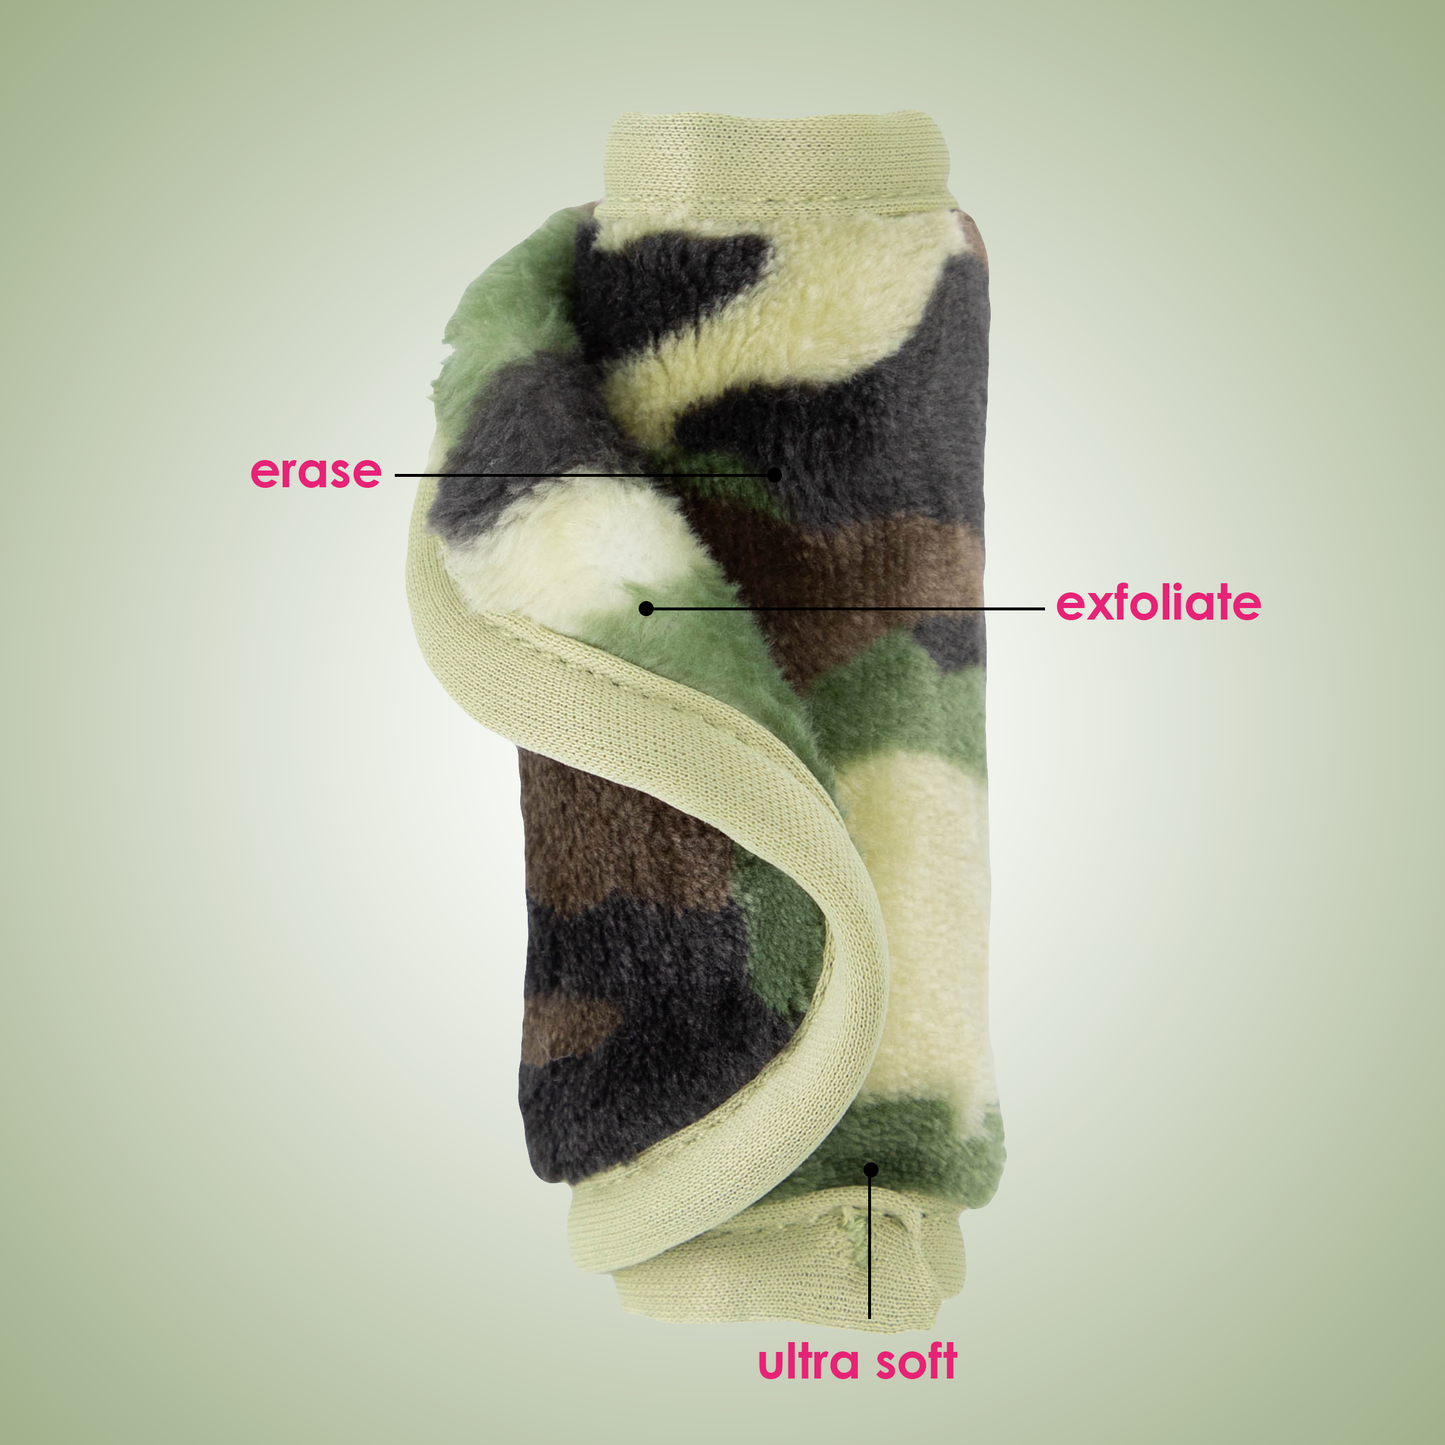 Rolled up Mini Camo MakeUp Eraser with both sides exposed. The short fiber side is labeled as erase, and the long fiber side is labeled as exfoliate.